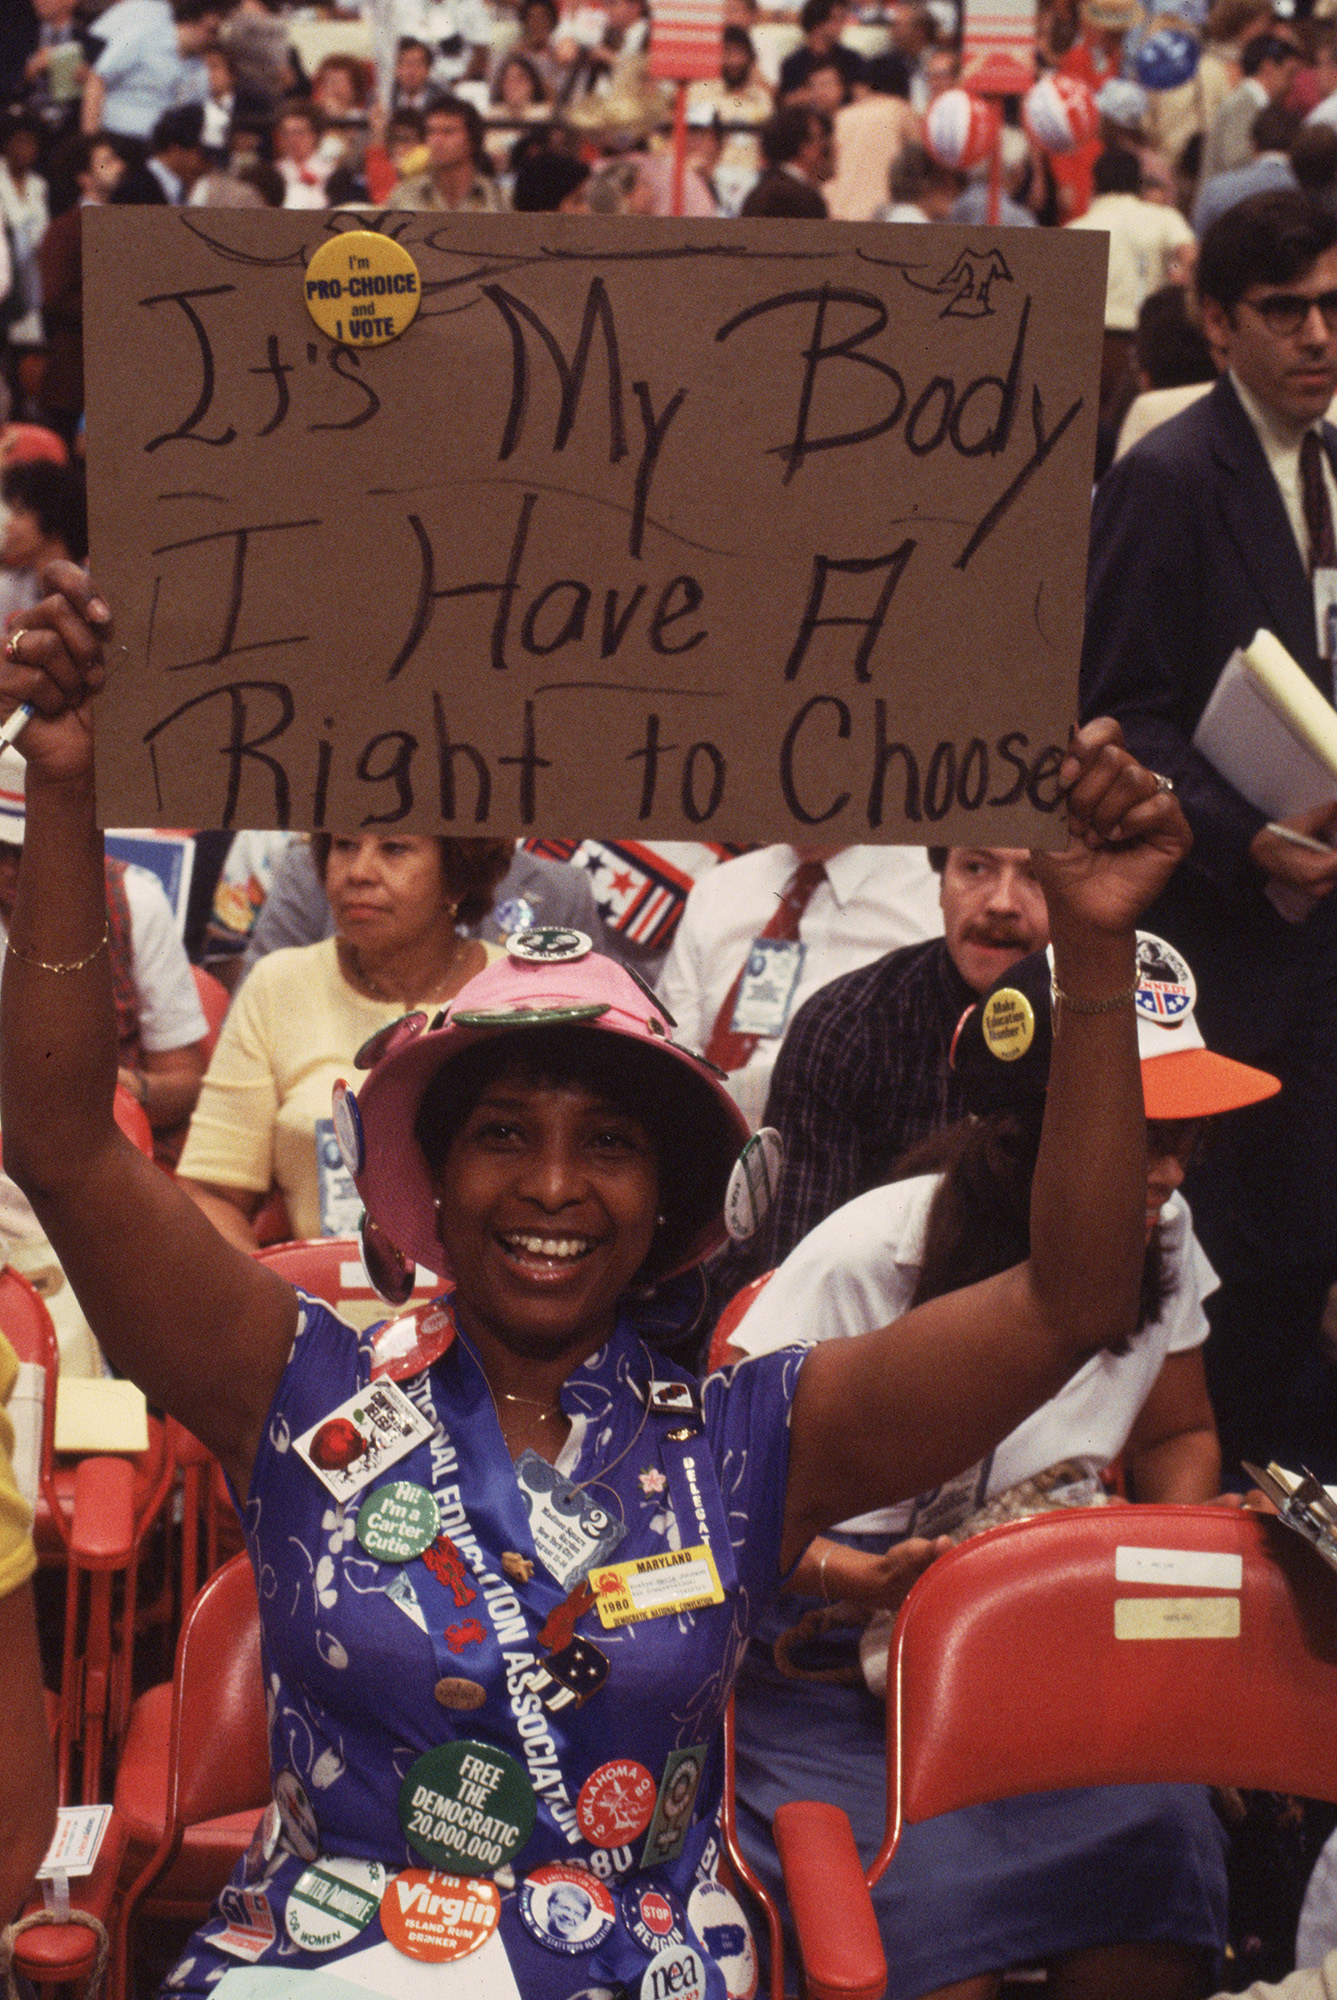 A woman holding up a sign reading &quot;It&#x27;s My Body And I Have A Right To Choose&quot;